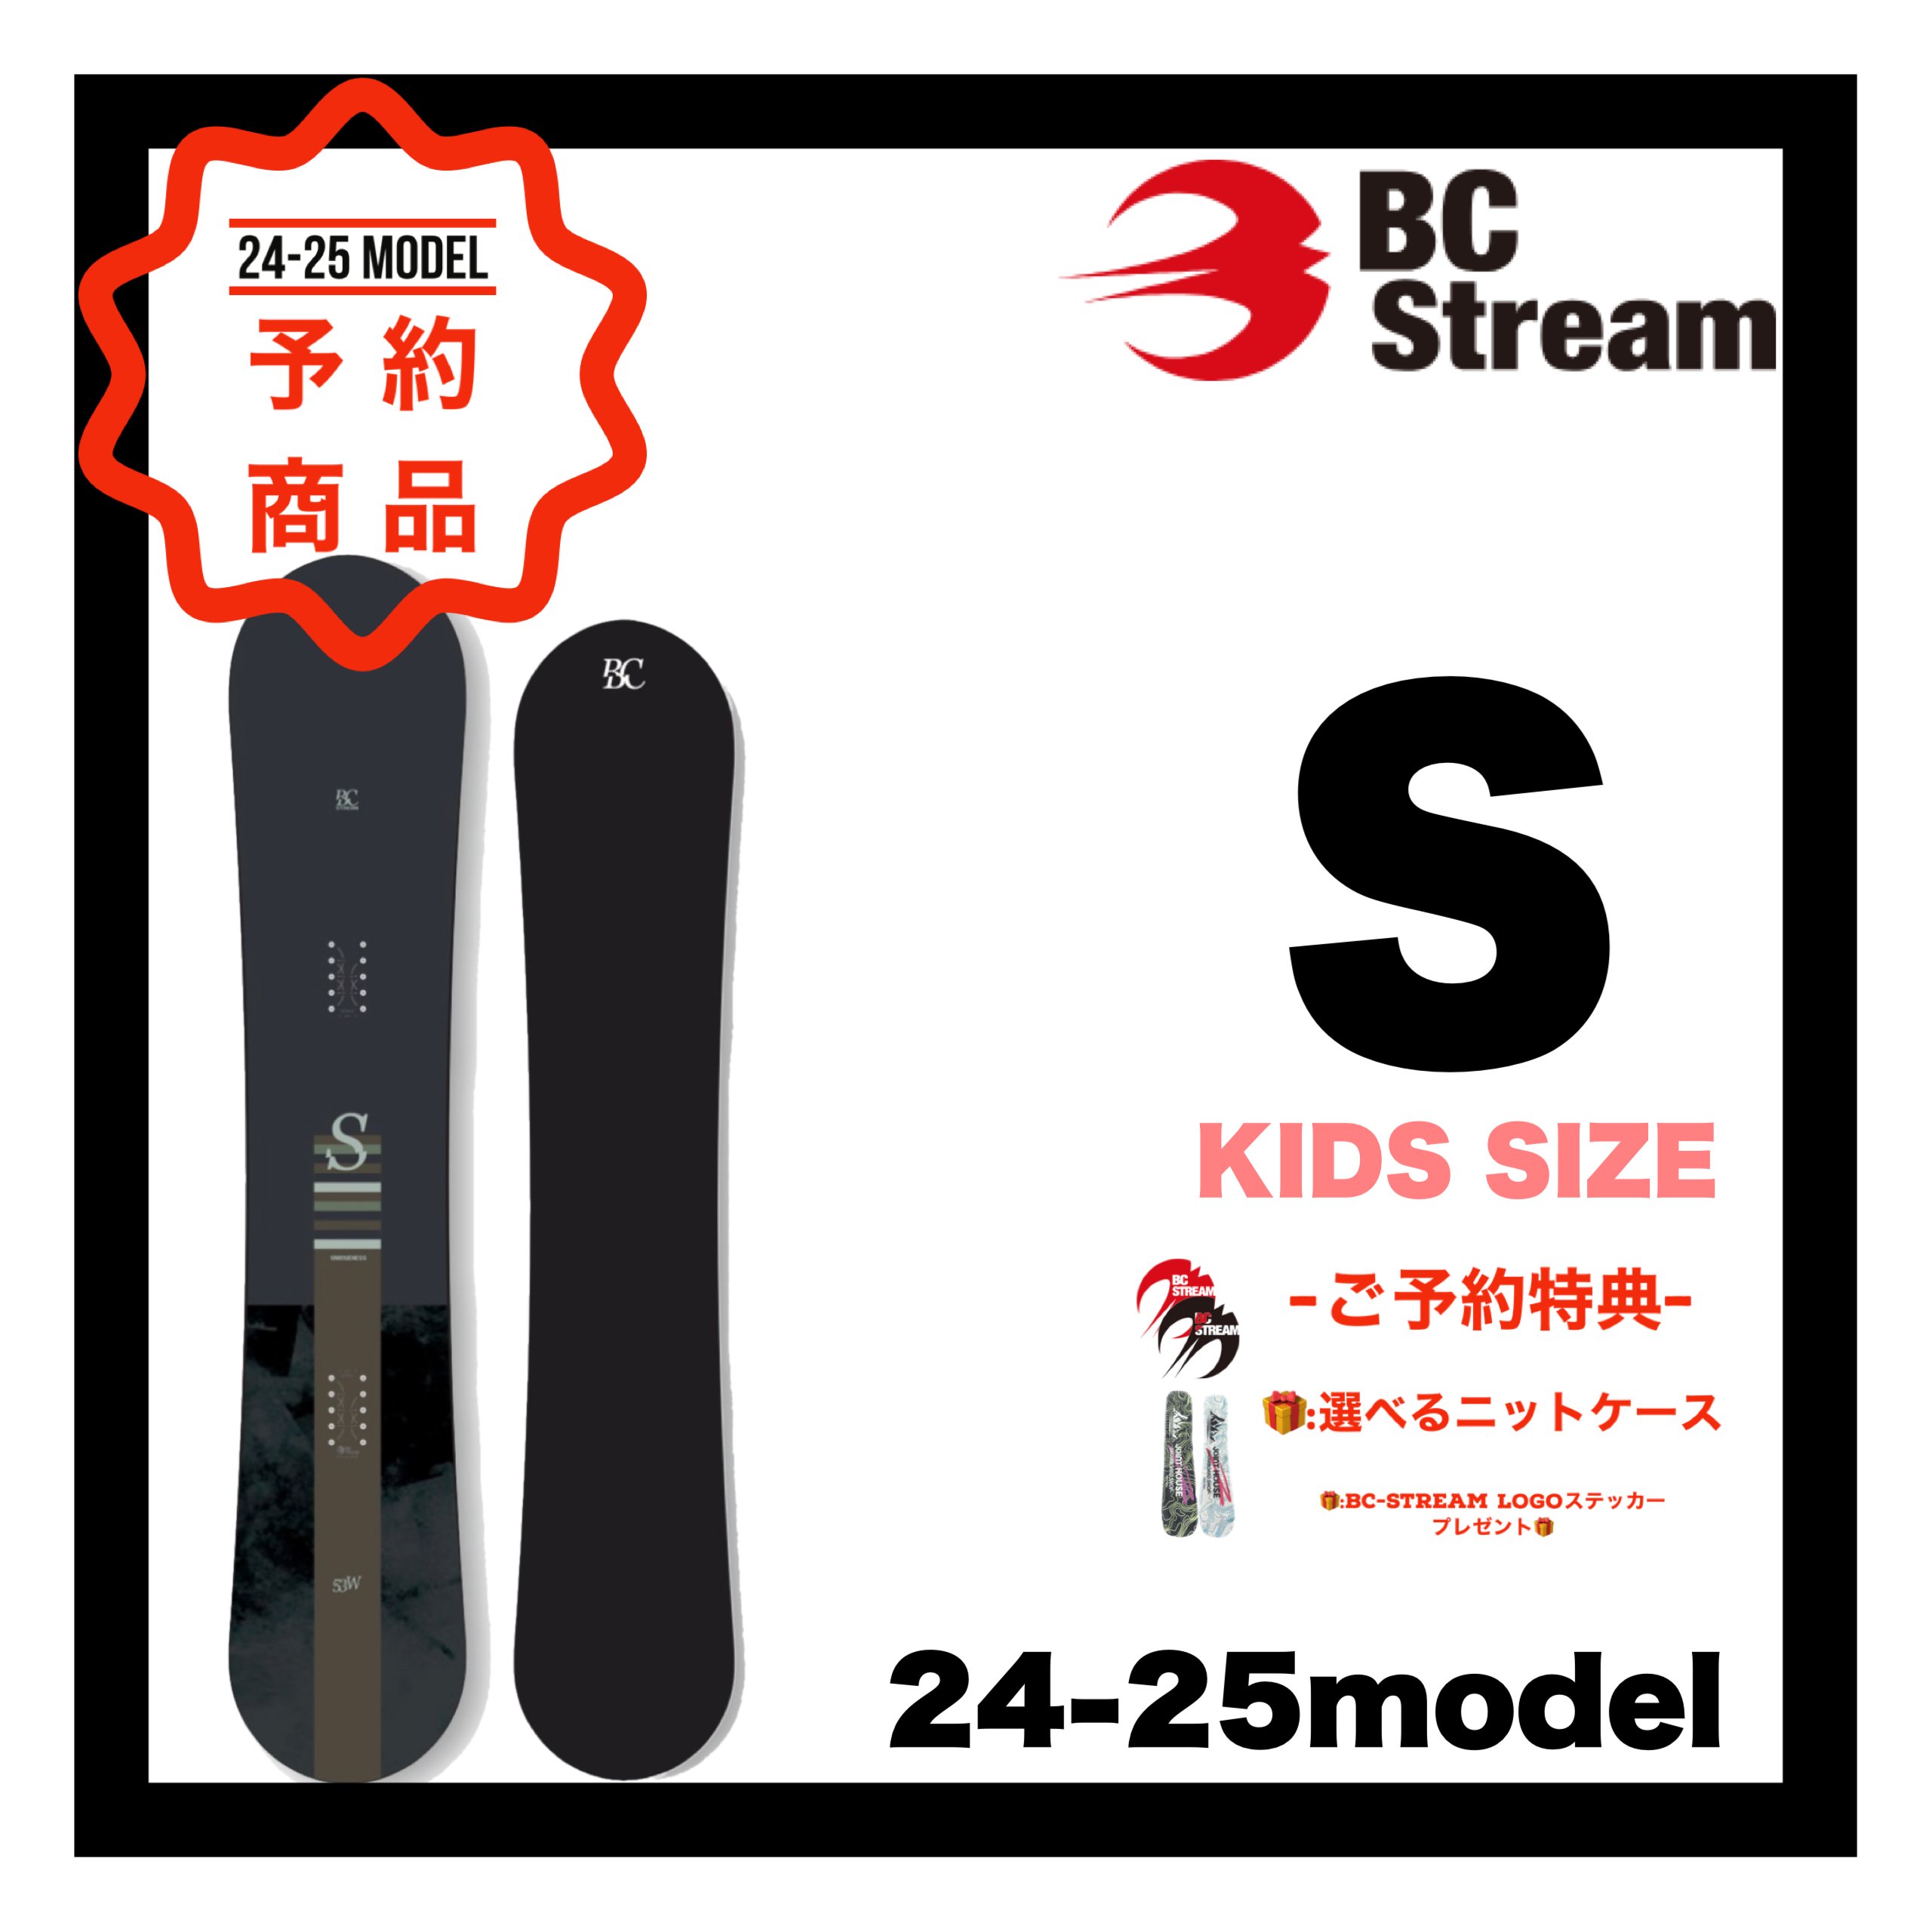 <img class='new_mark_img1' src='https://img.shop-pro.jp/img/new/icons14.gif' style='border:none;display:inline;margin:0px;padding:0px;width:auto;' /> BC-STREAM  ڣKIDS SIZE